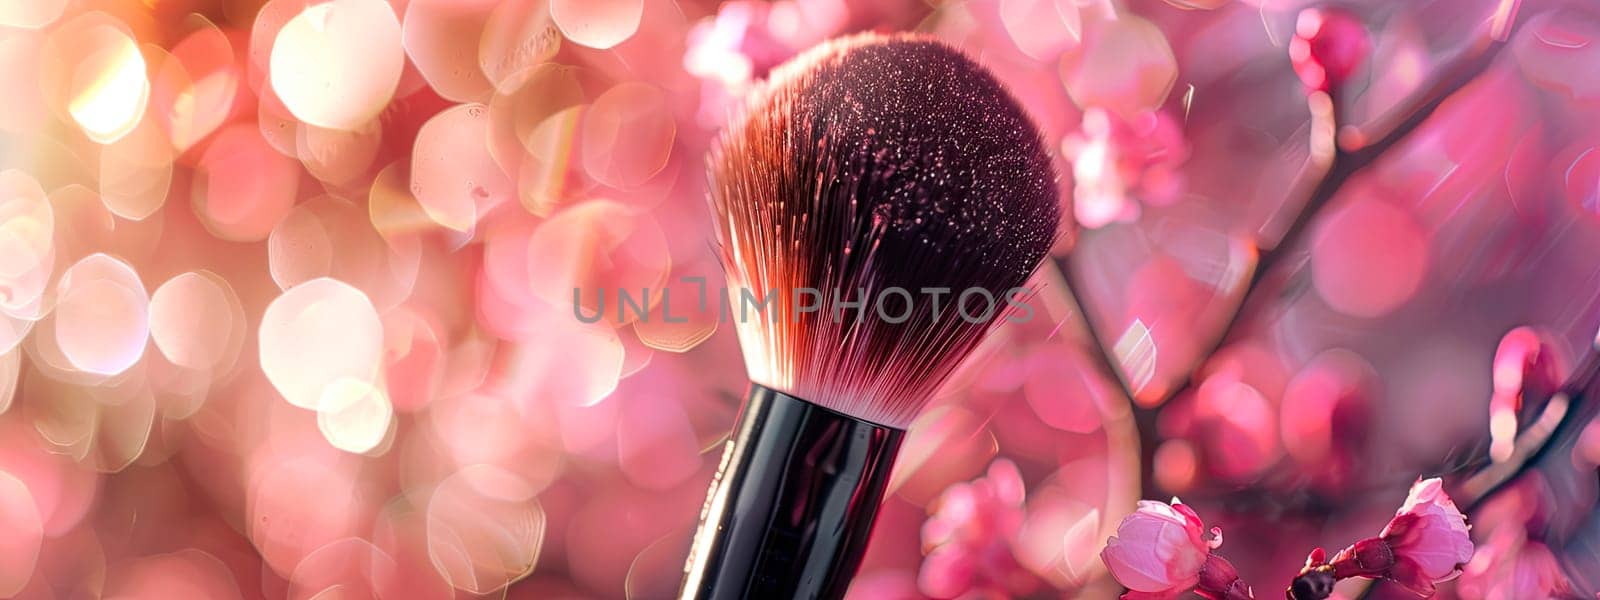 makeup brush on a background of flowers. selective focus. spa.